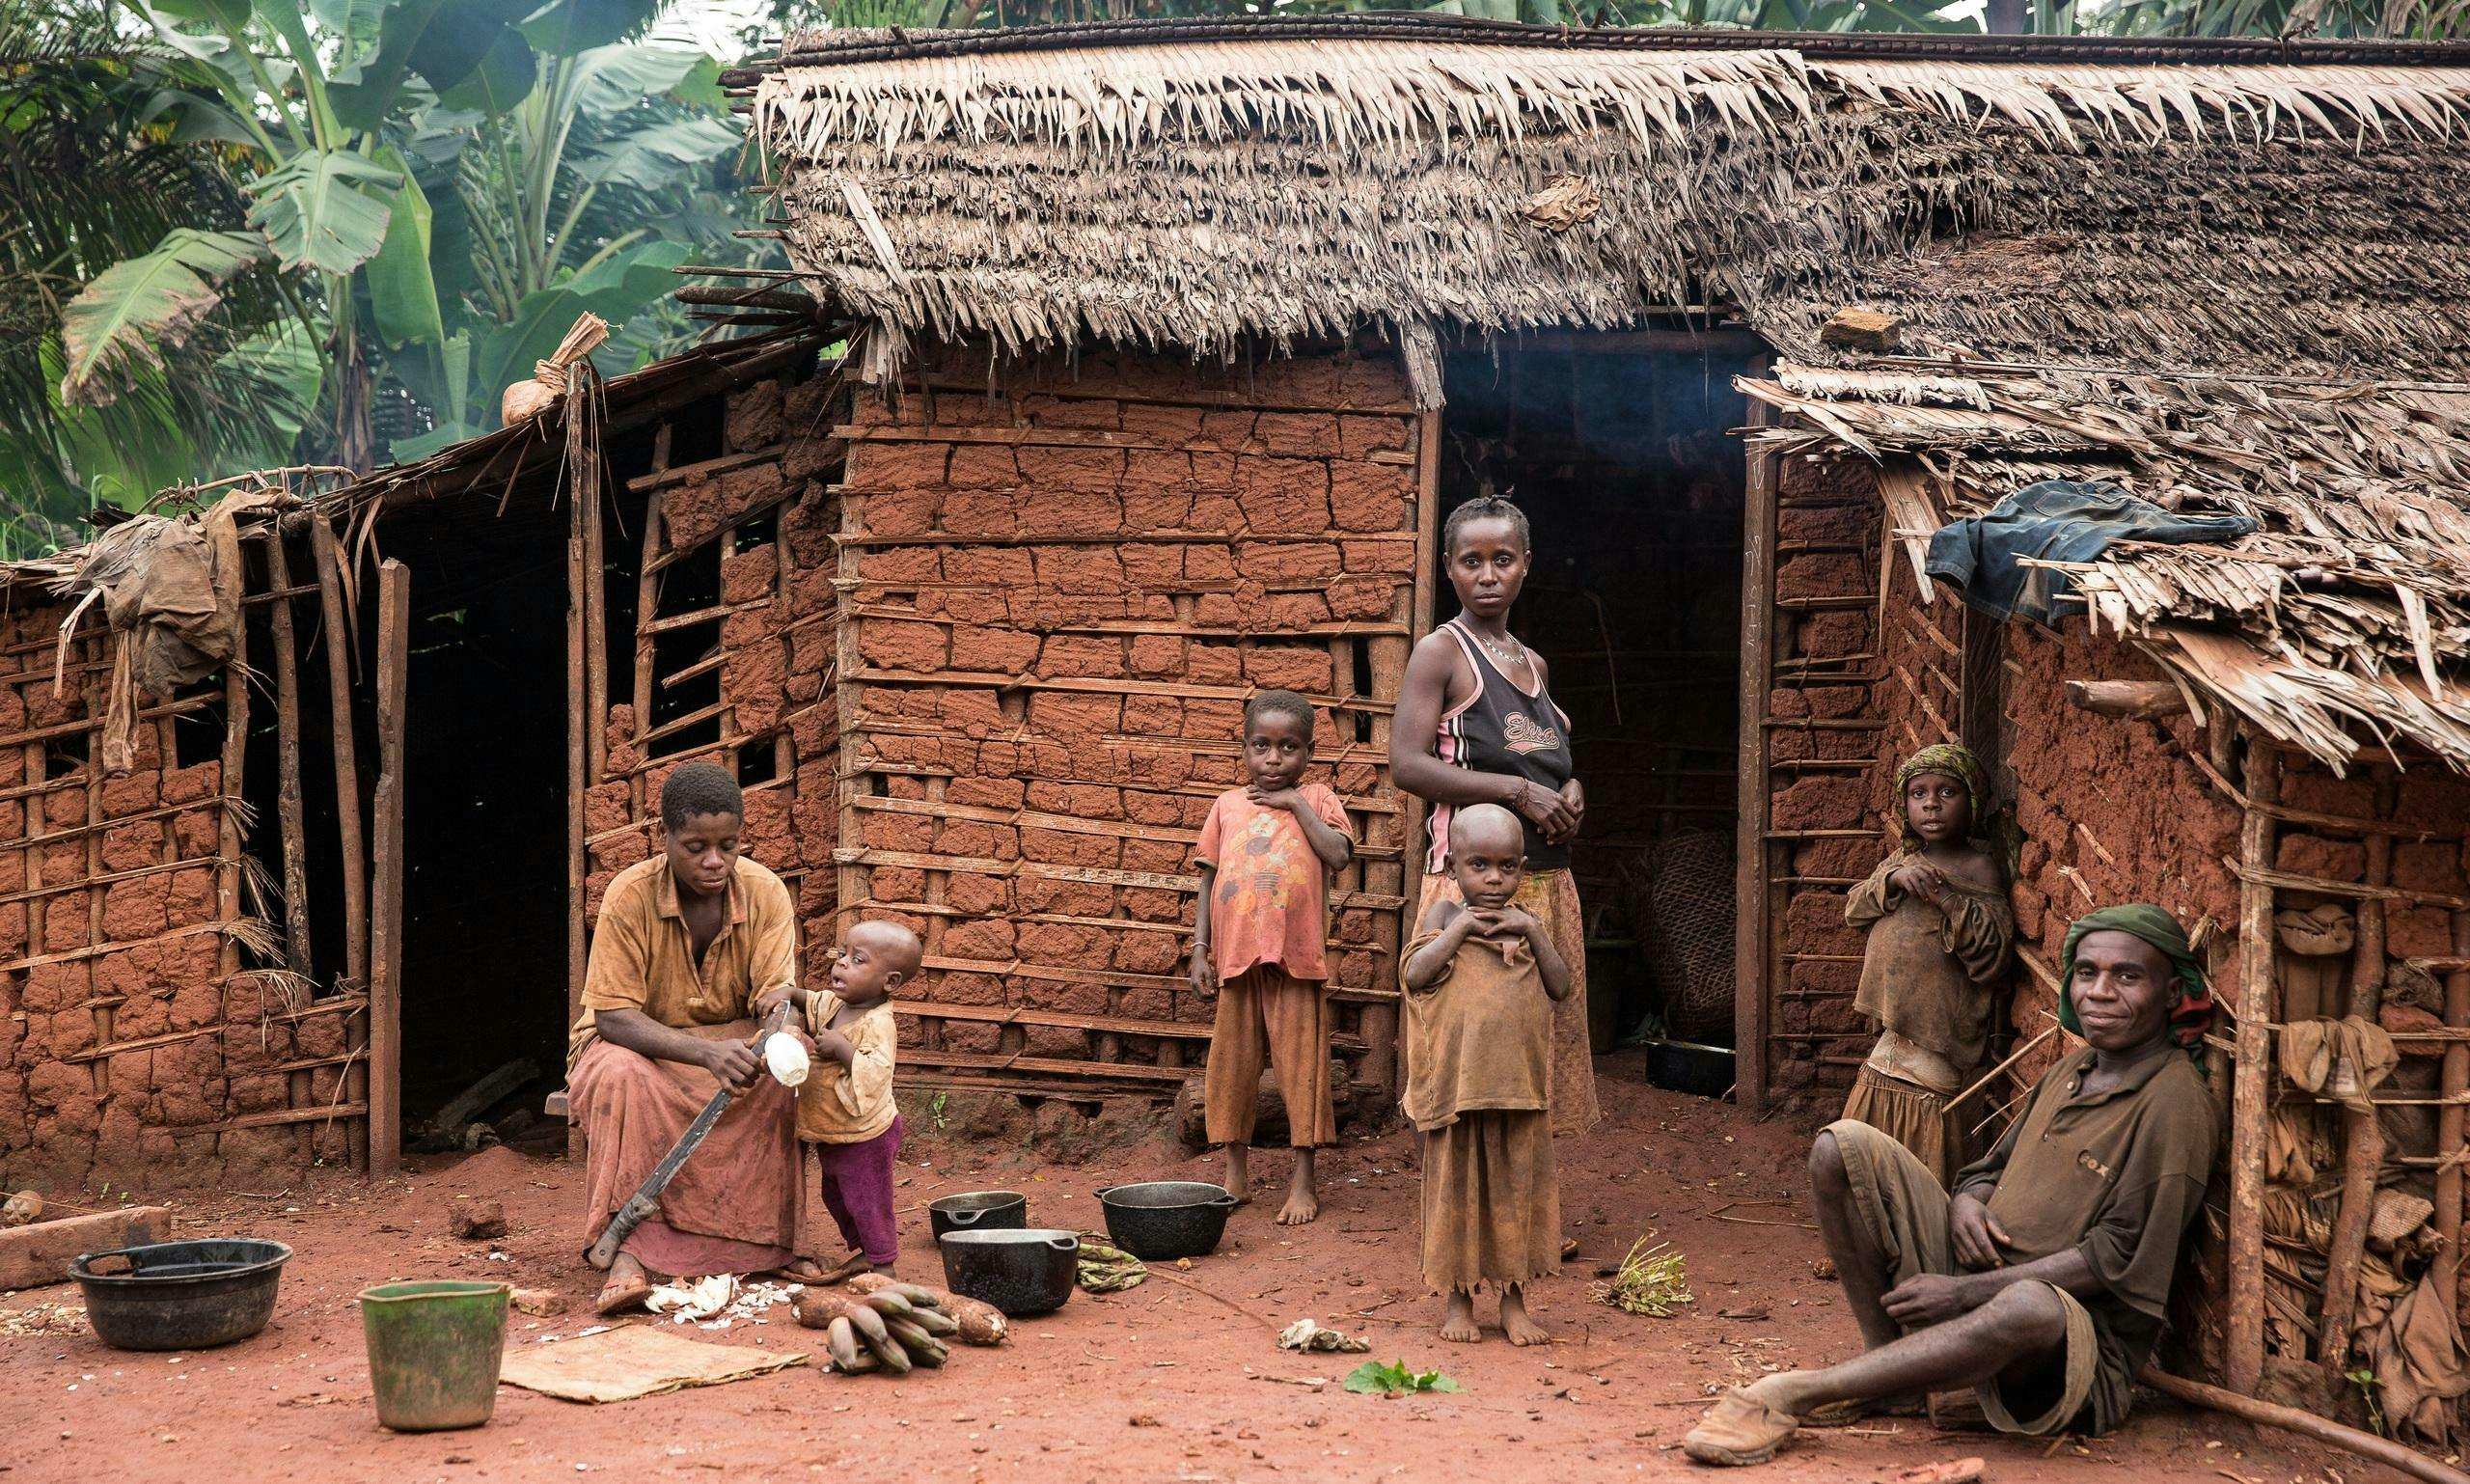 A Baka family in front of a mud hut in their village. A mother and her child are sitting on the ground preparing food. Three other children and a young woman stand in front of the entrance. An elderly man sits on the ground and leans against a wall.